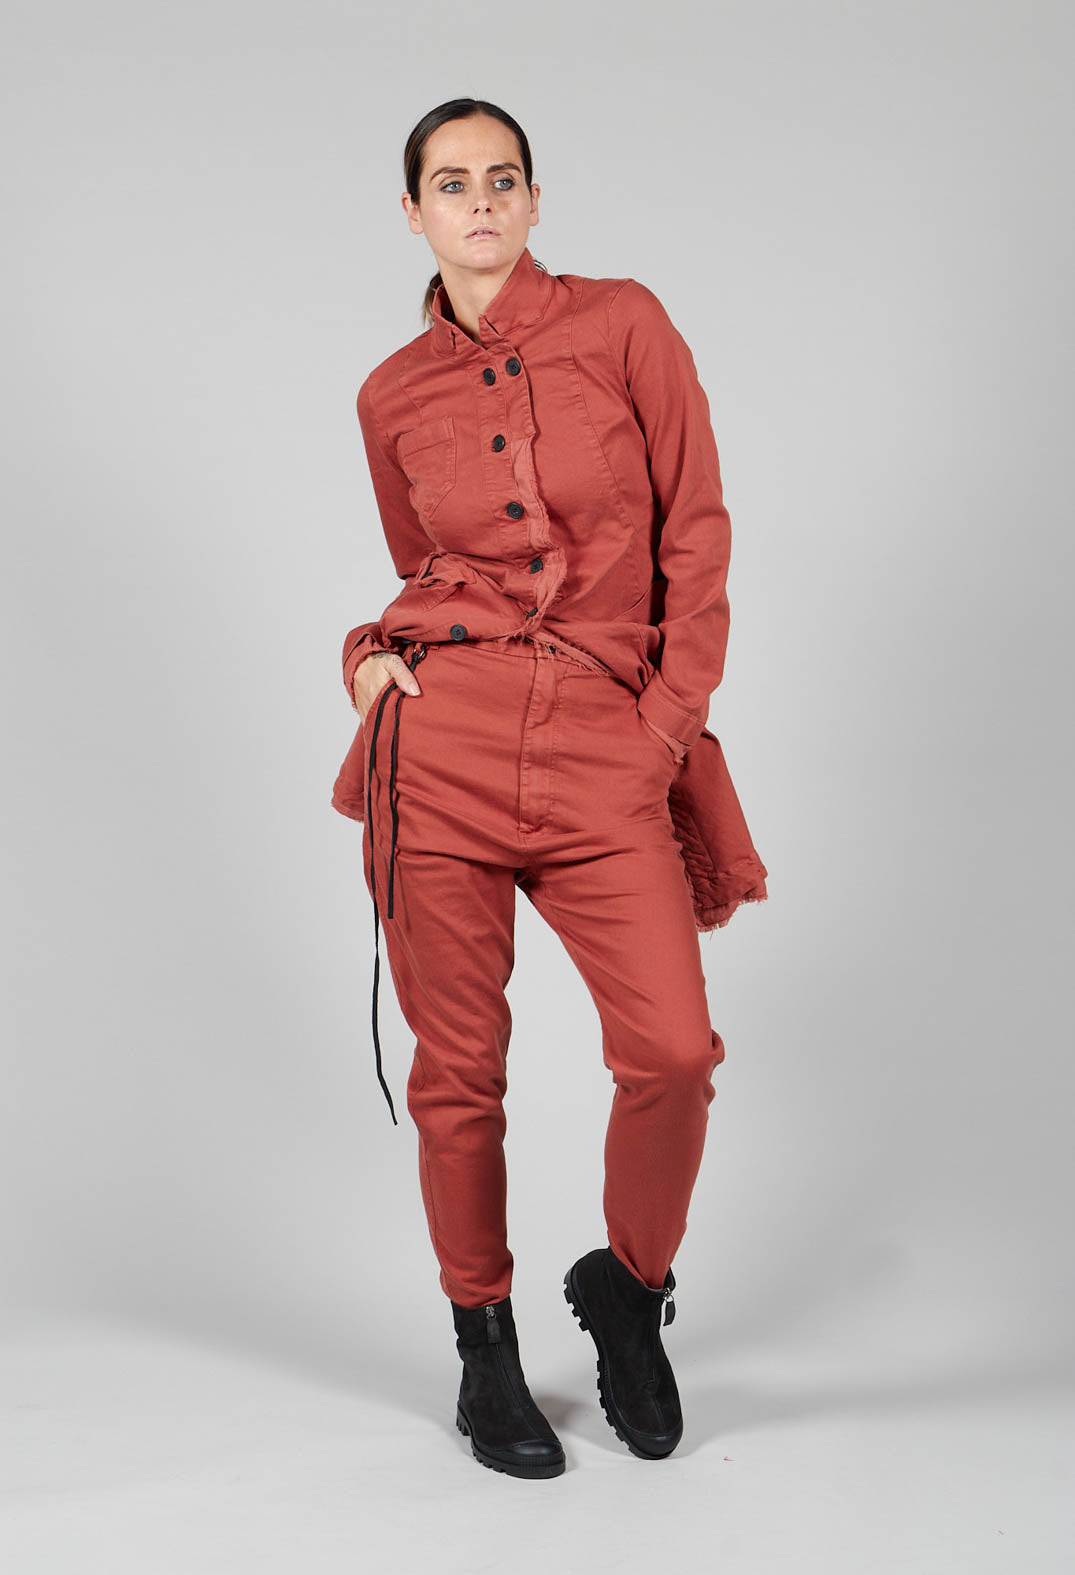 Slim Fit Trousers in Picante